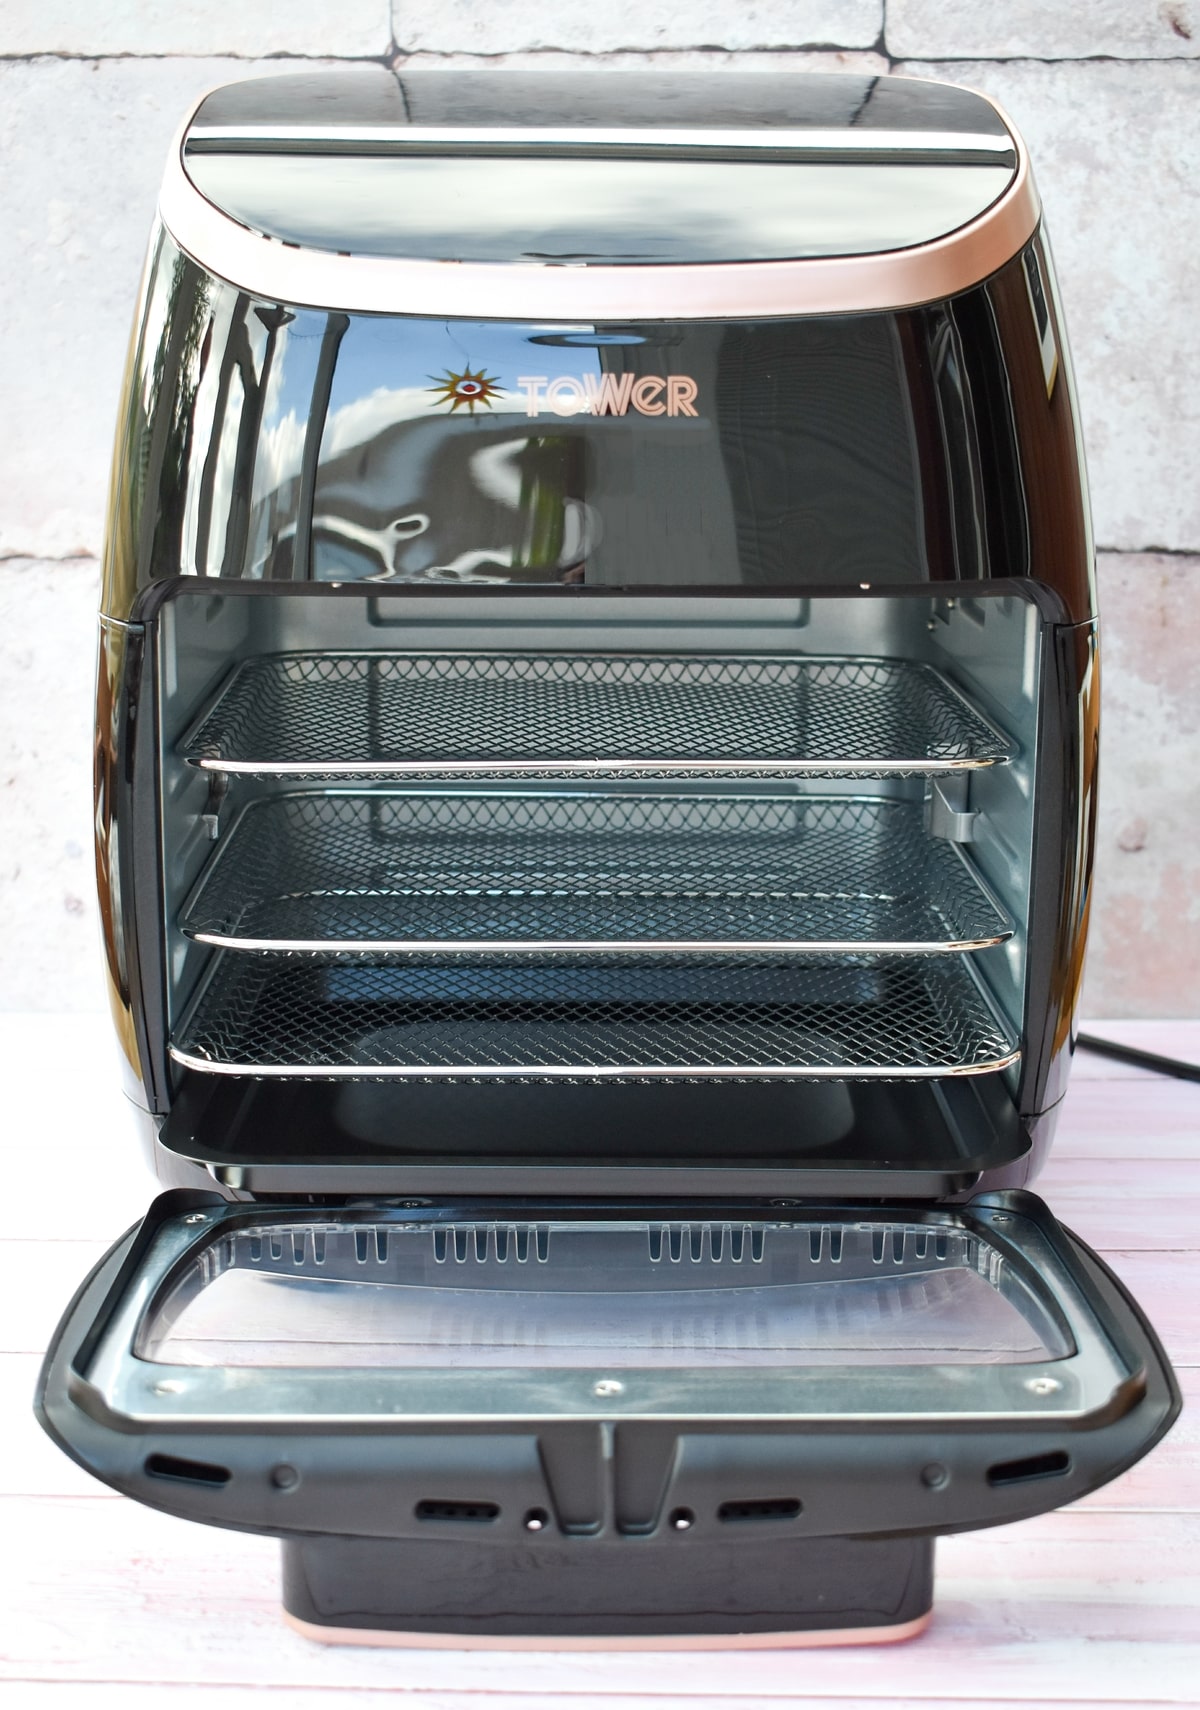 Air fryer with shelves